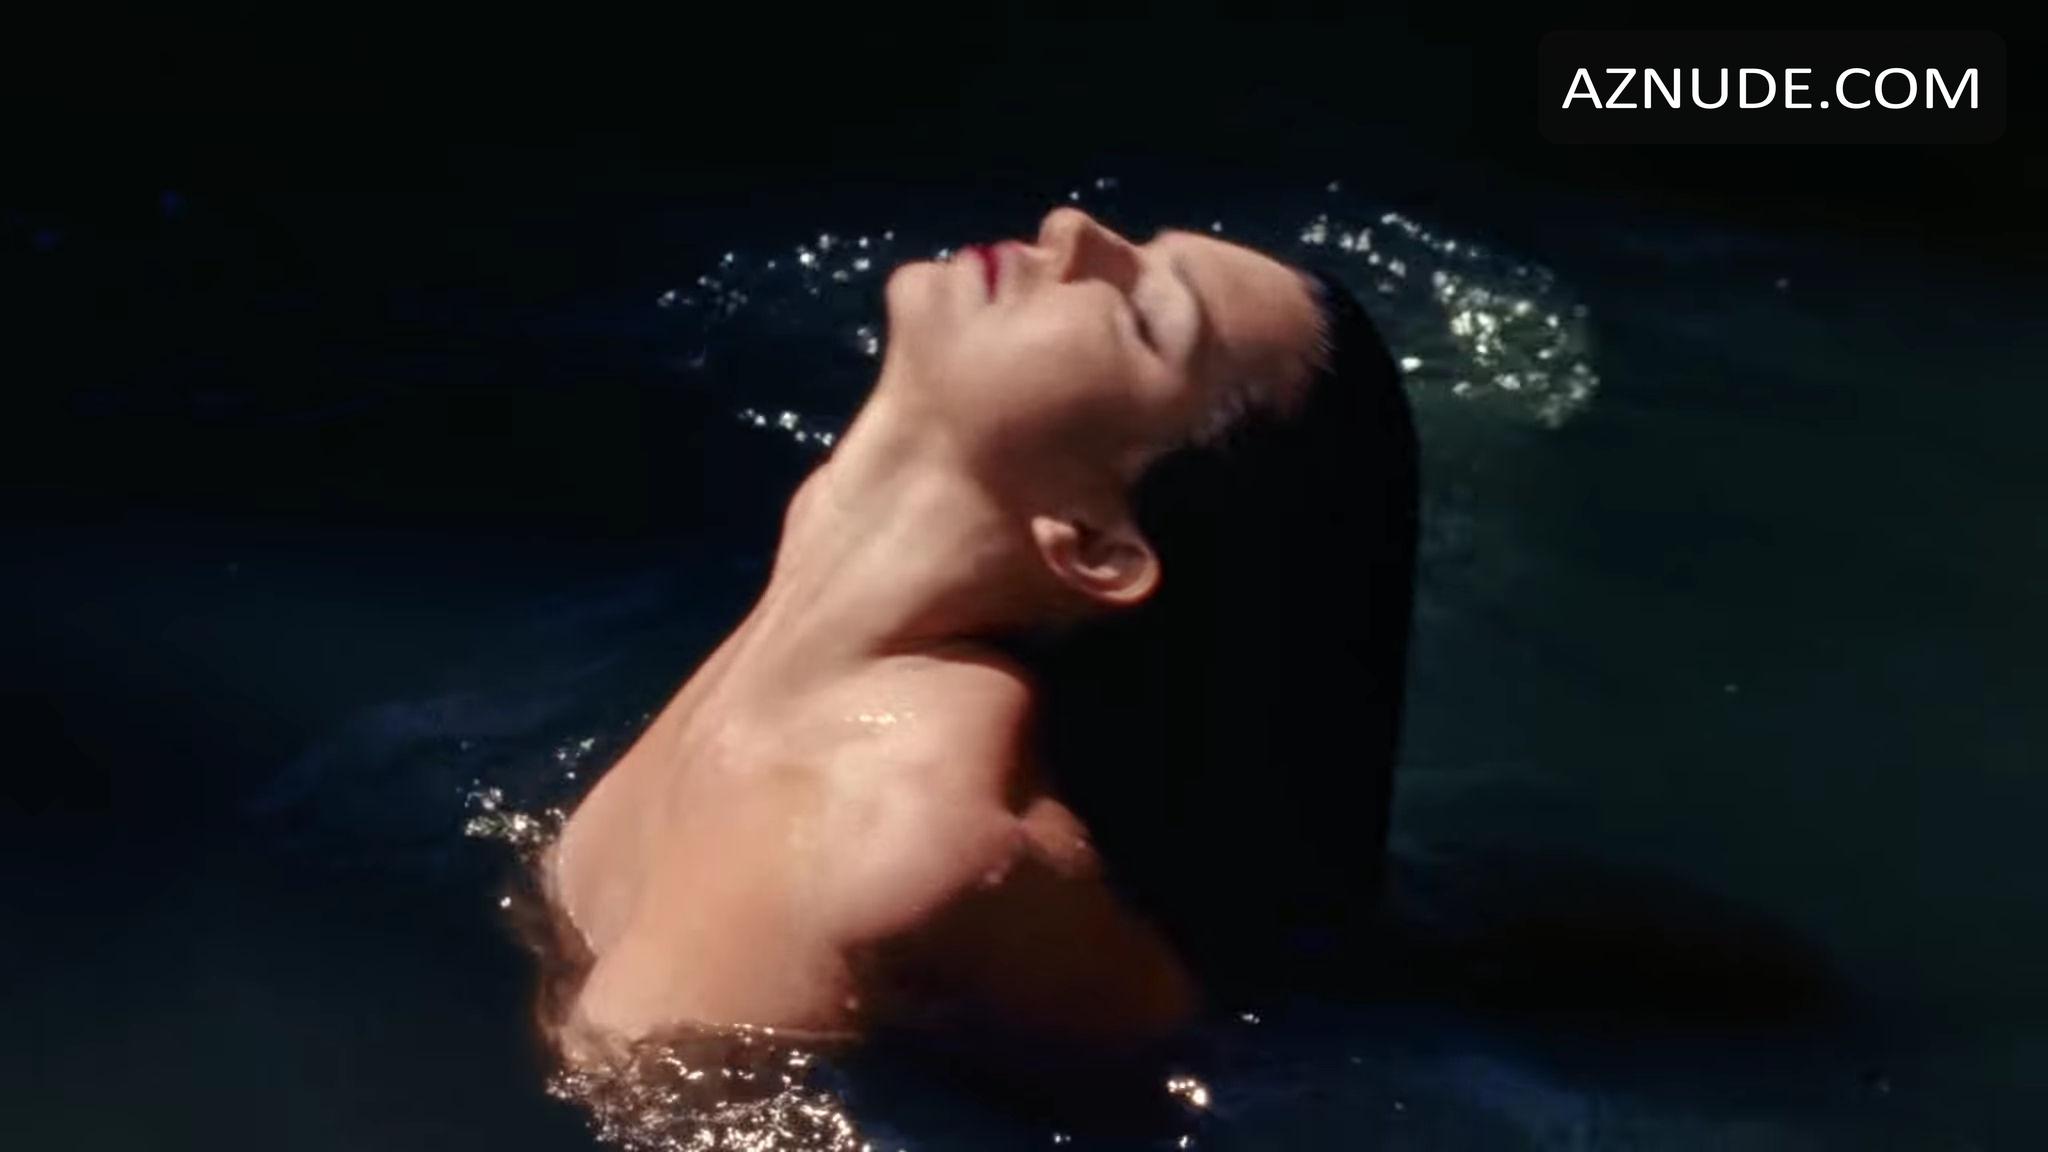 Kendall Jenner Topless For Love Aznude